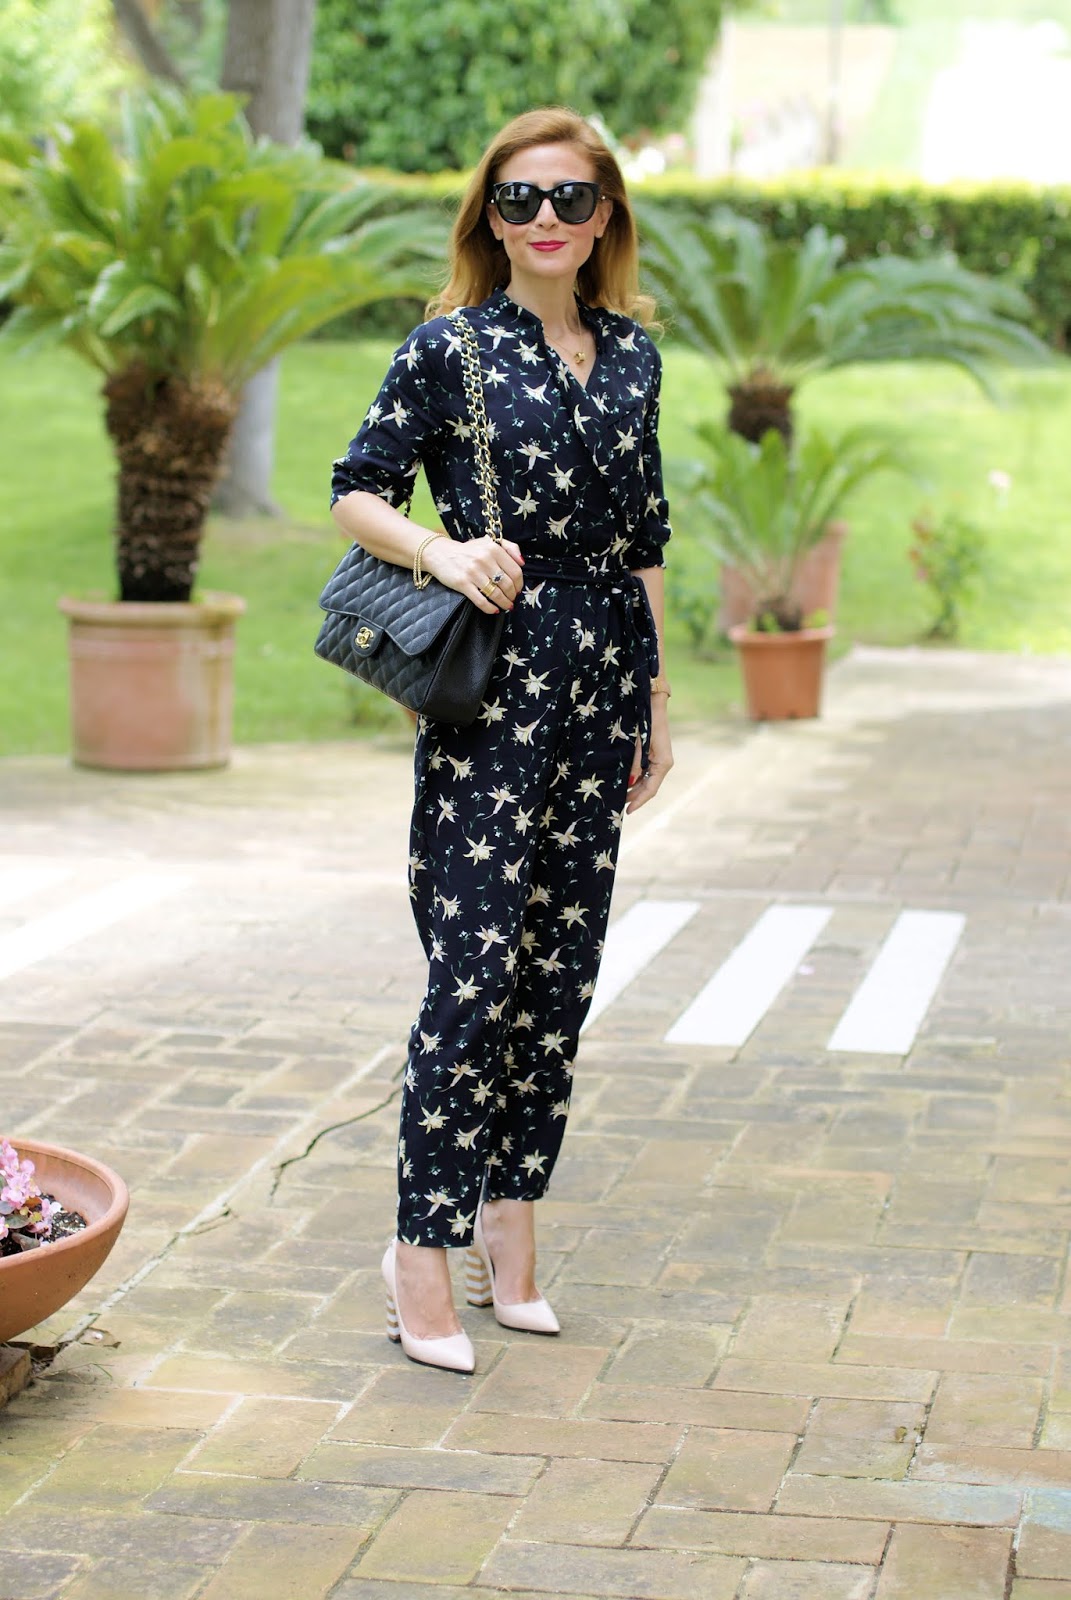 Floral jumpsuit, Chanel 2.55 and Pollini shoes on Fashion and Cookies fashion blog, fashion blogger style